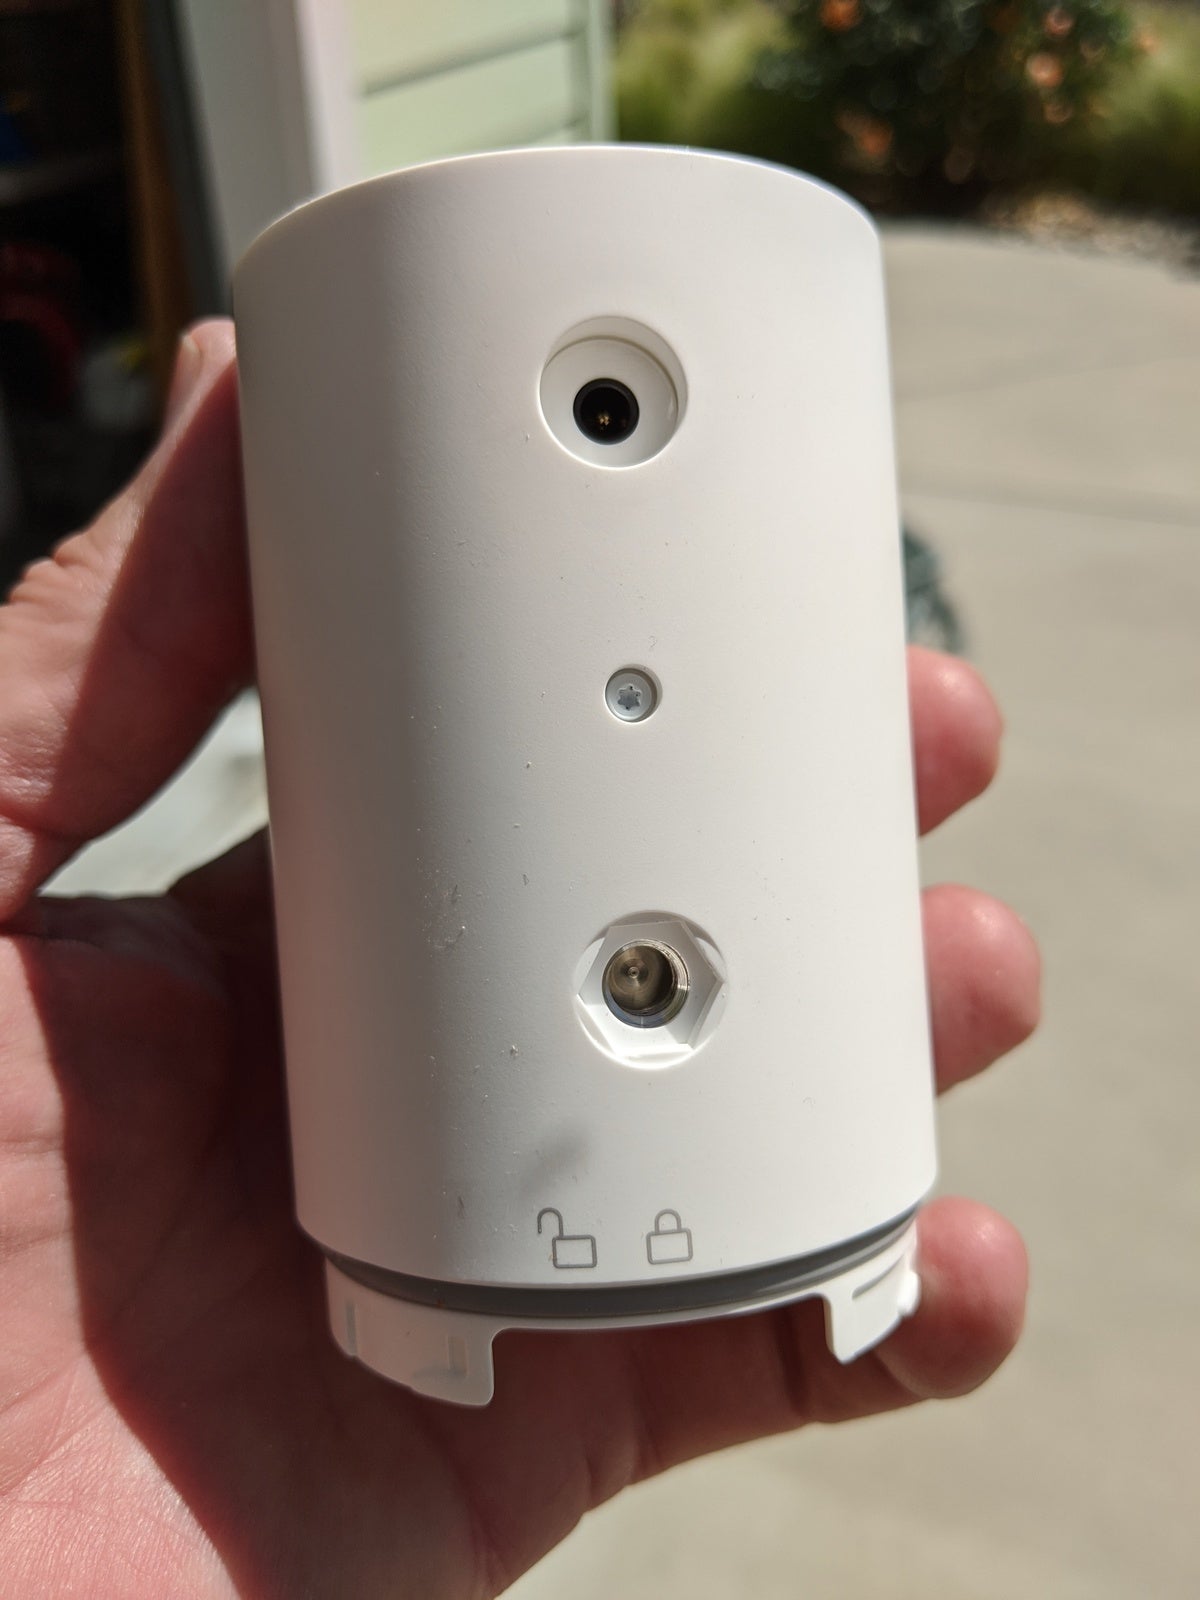 Ring Stick Up Cam Battery review: Inexpensive and reliable wireless video surveillance, indoors and out